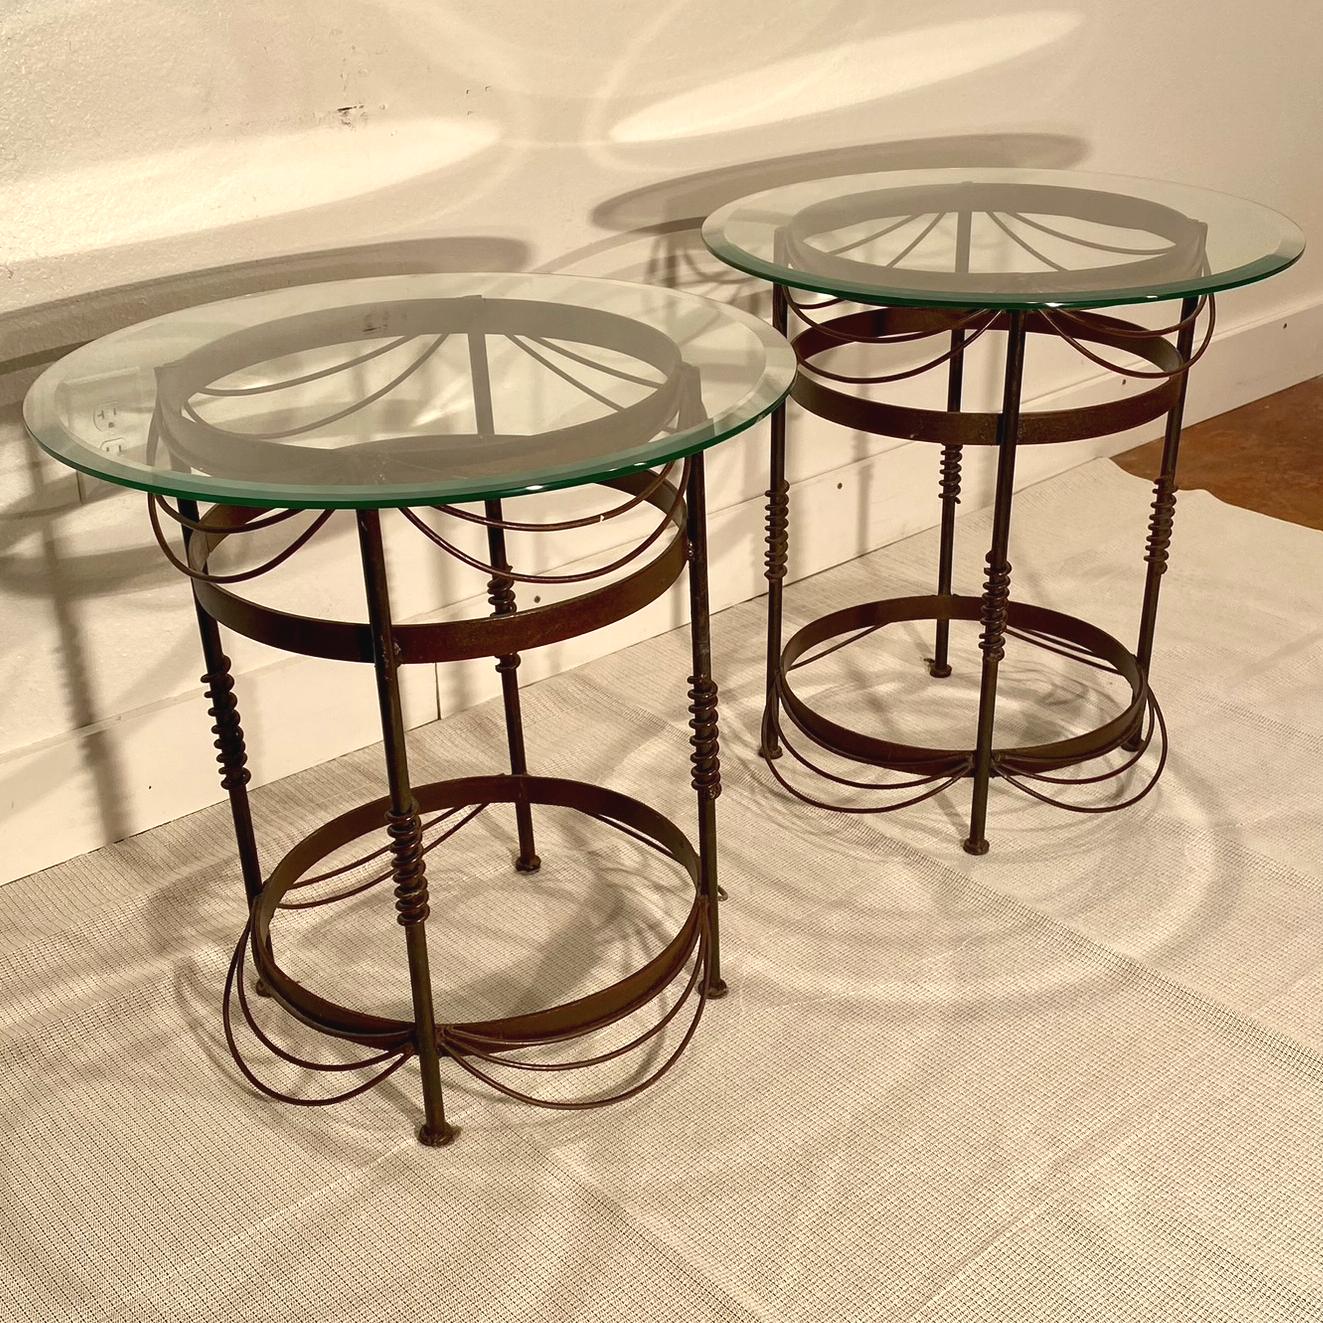 Pair of Glass End Tables